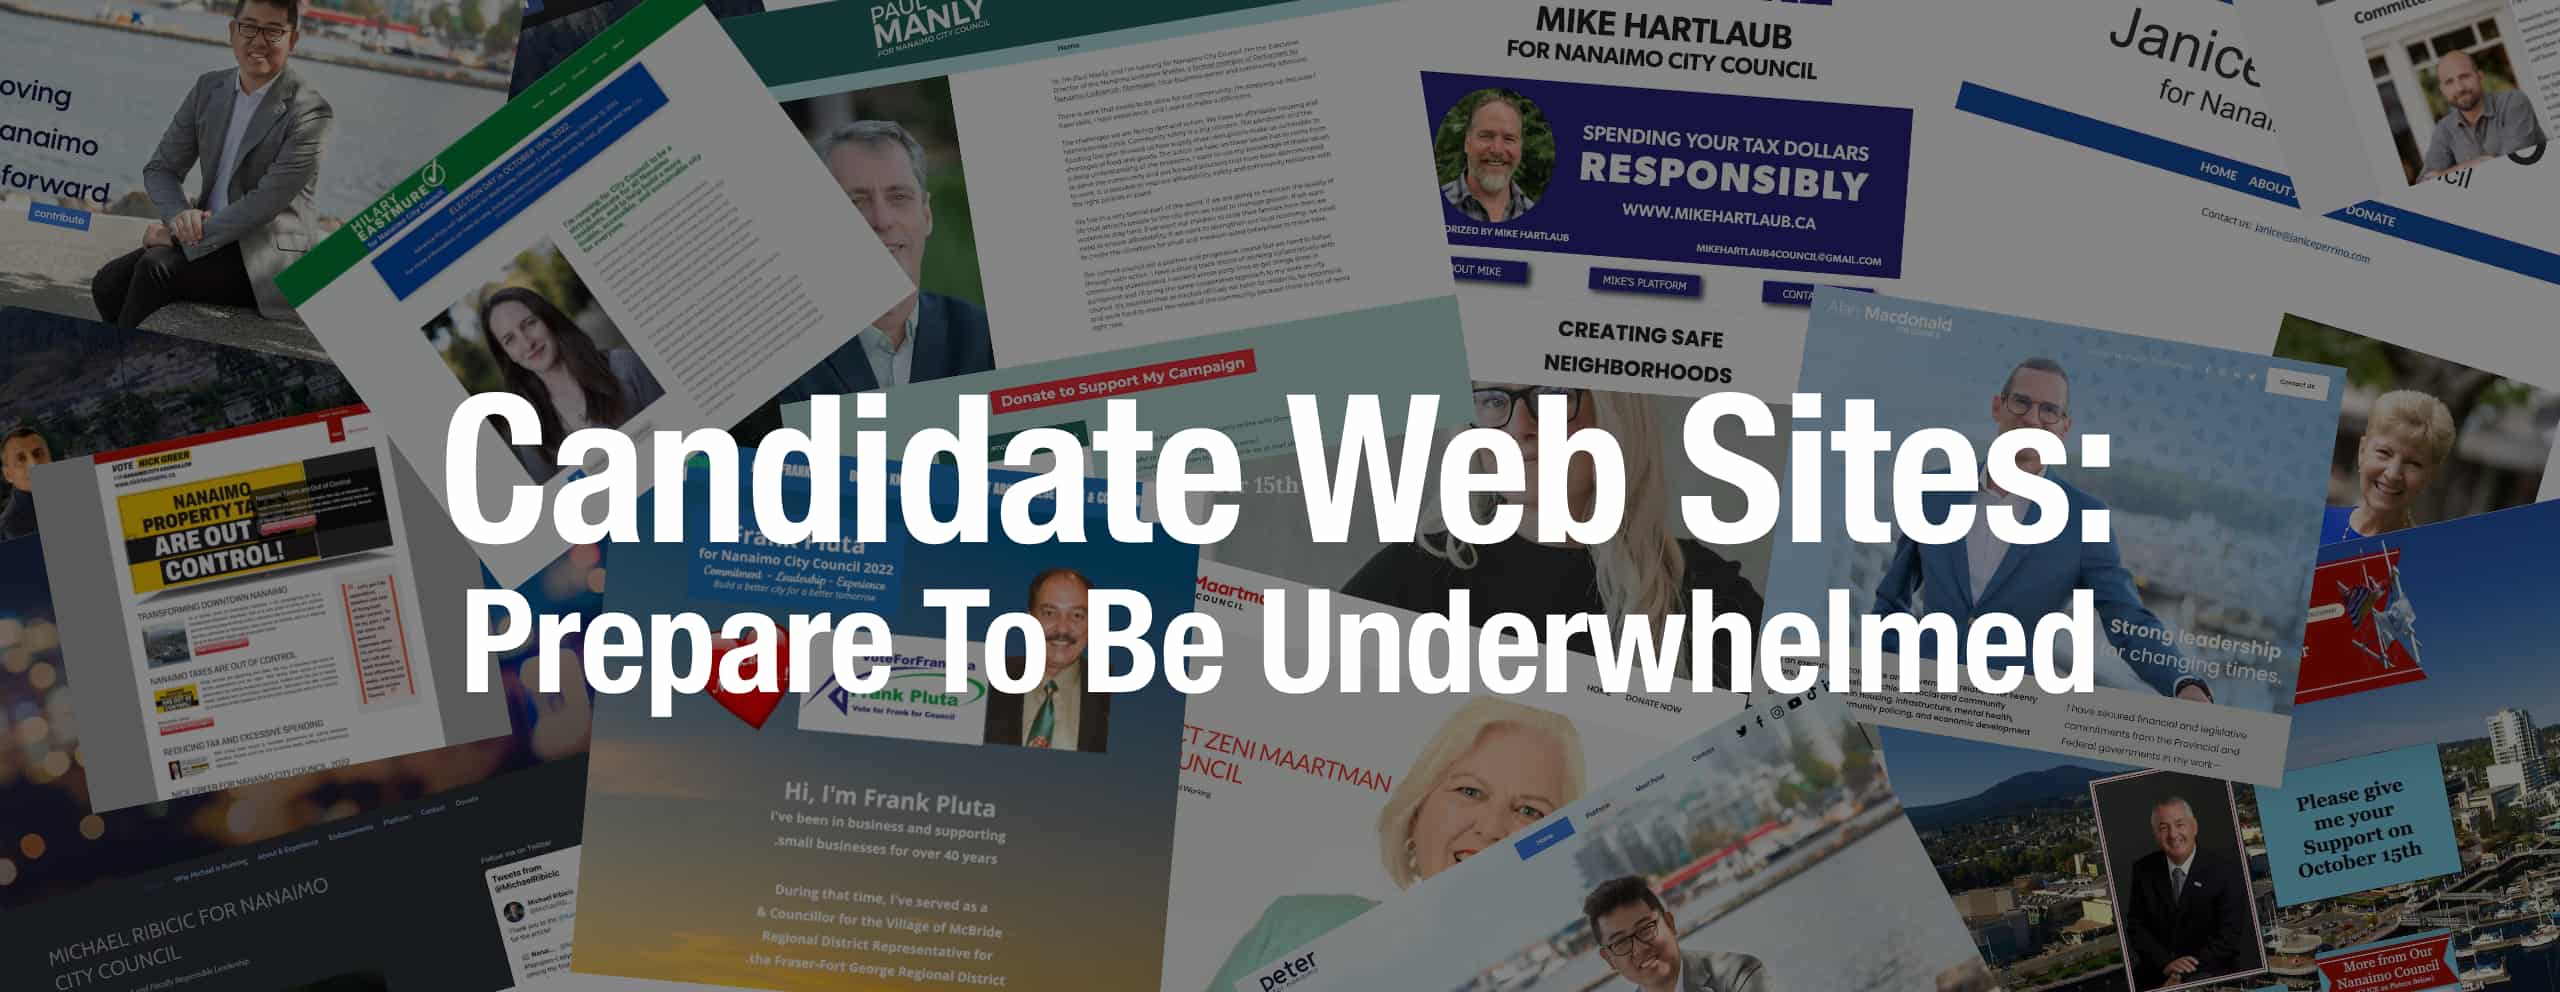 Rating the Nanaimo Candidates’ Web Sites